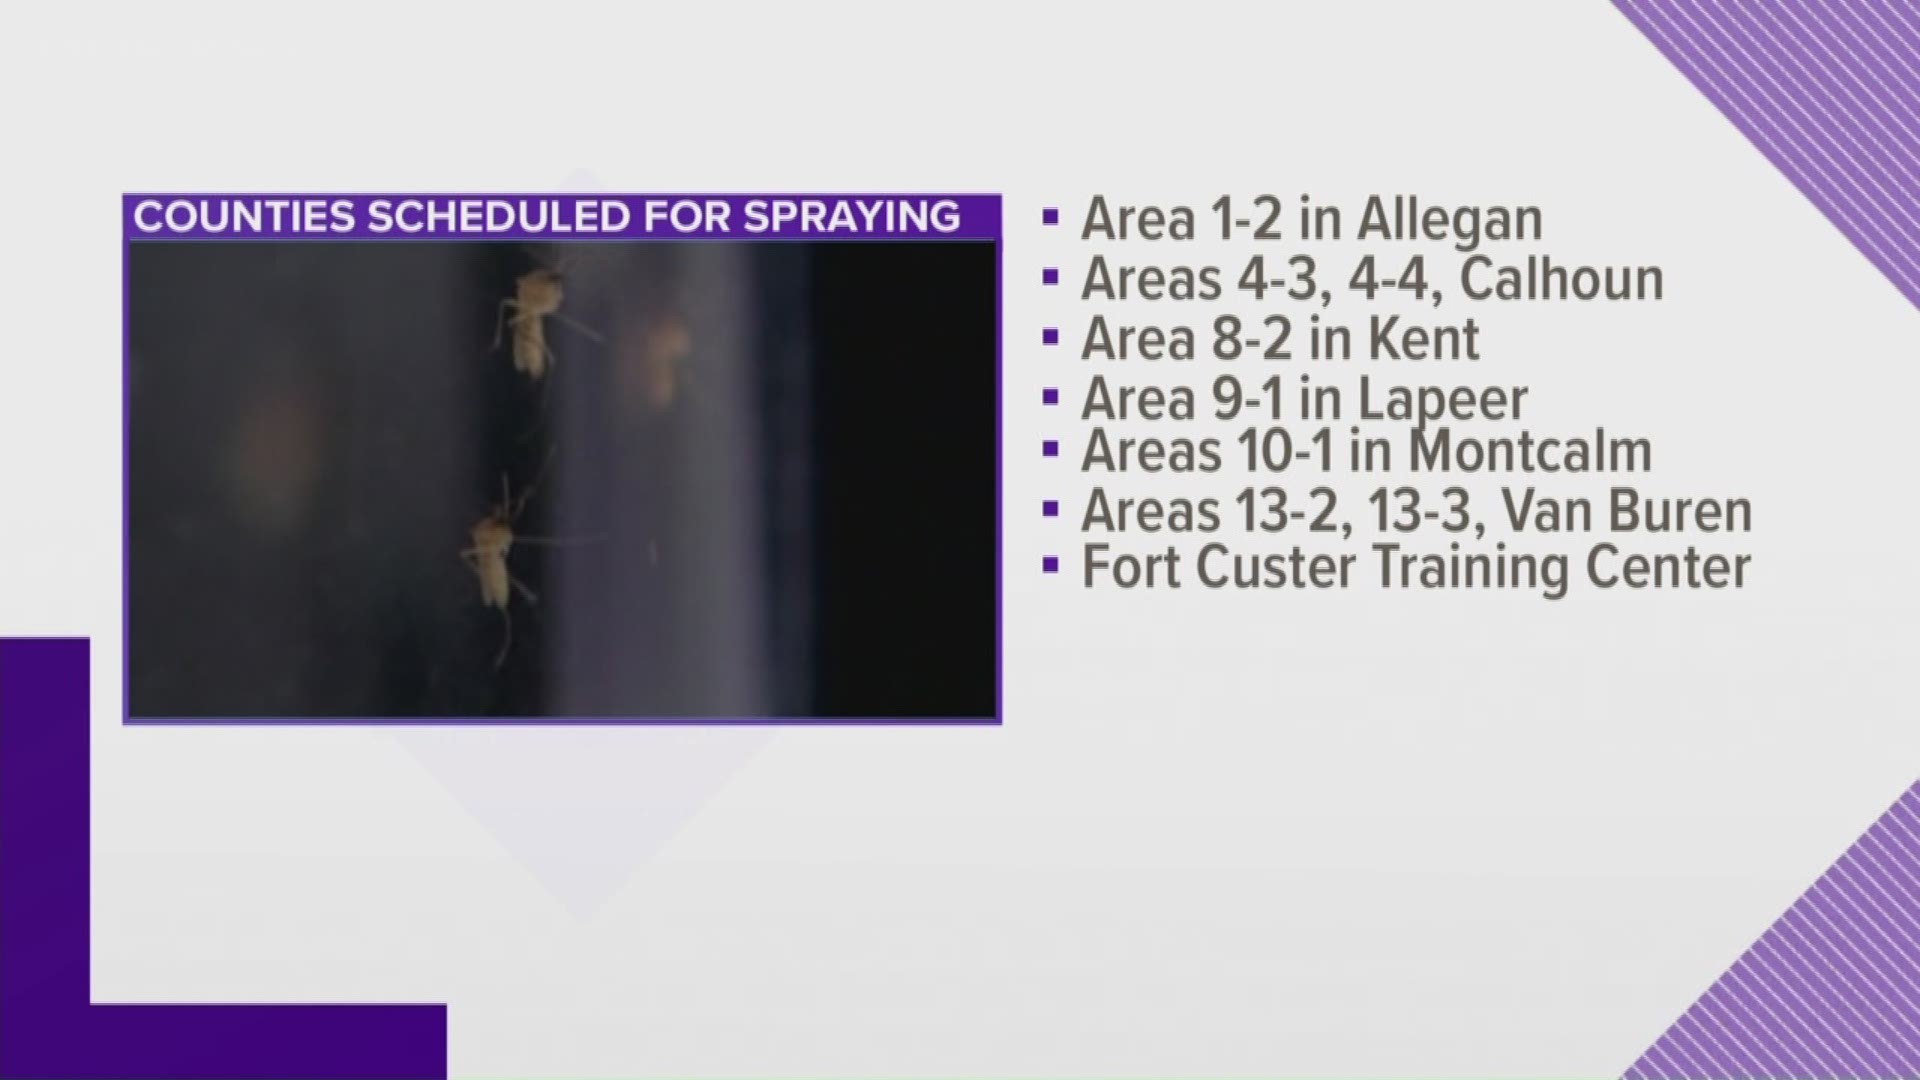 Aerial spraying for EEE is scheduled to be finished Sunday night.